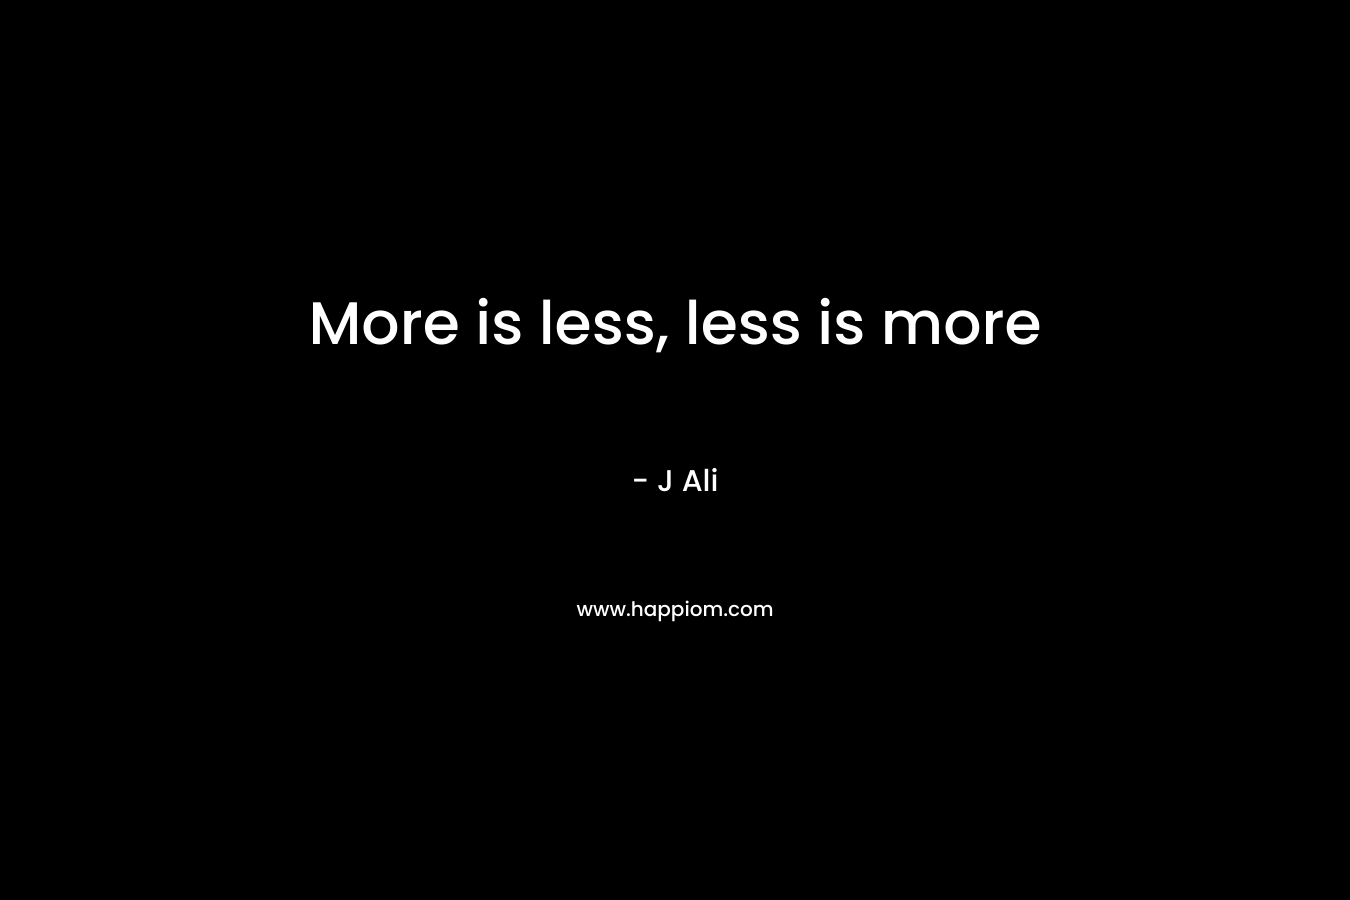 More is less, less is more